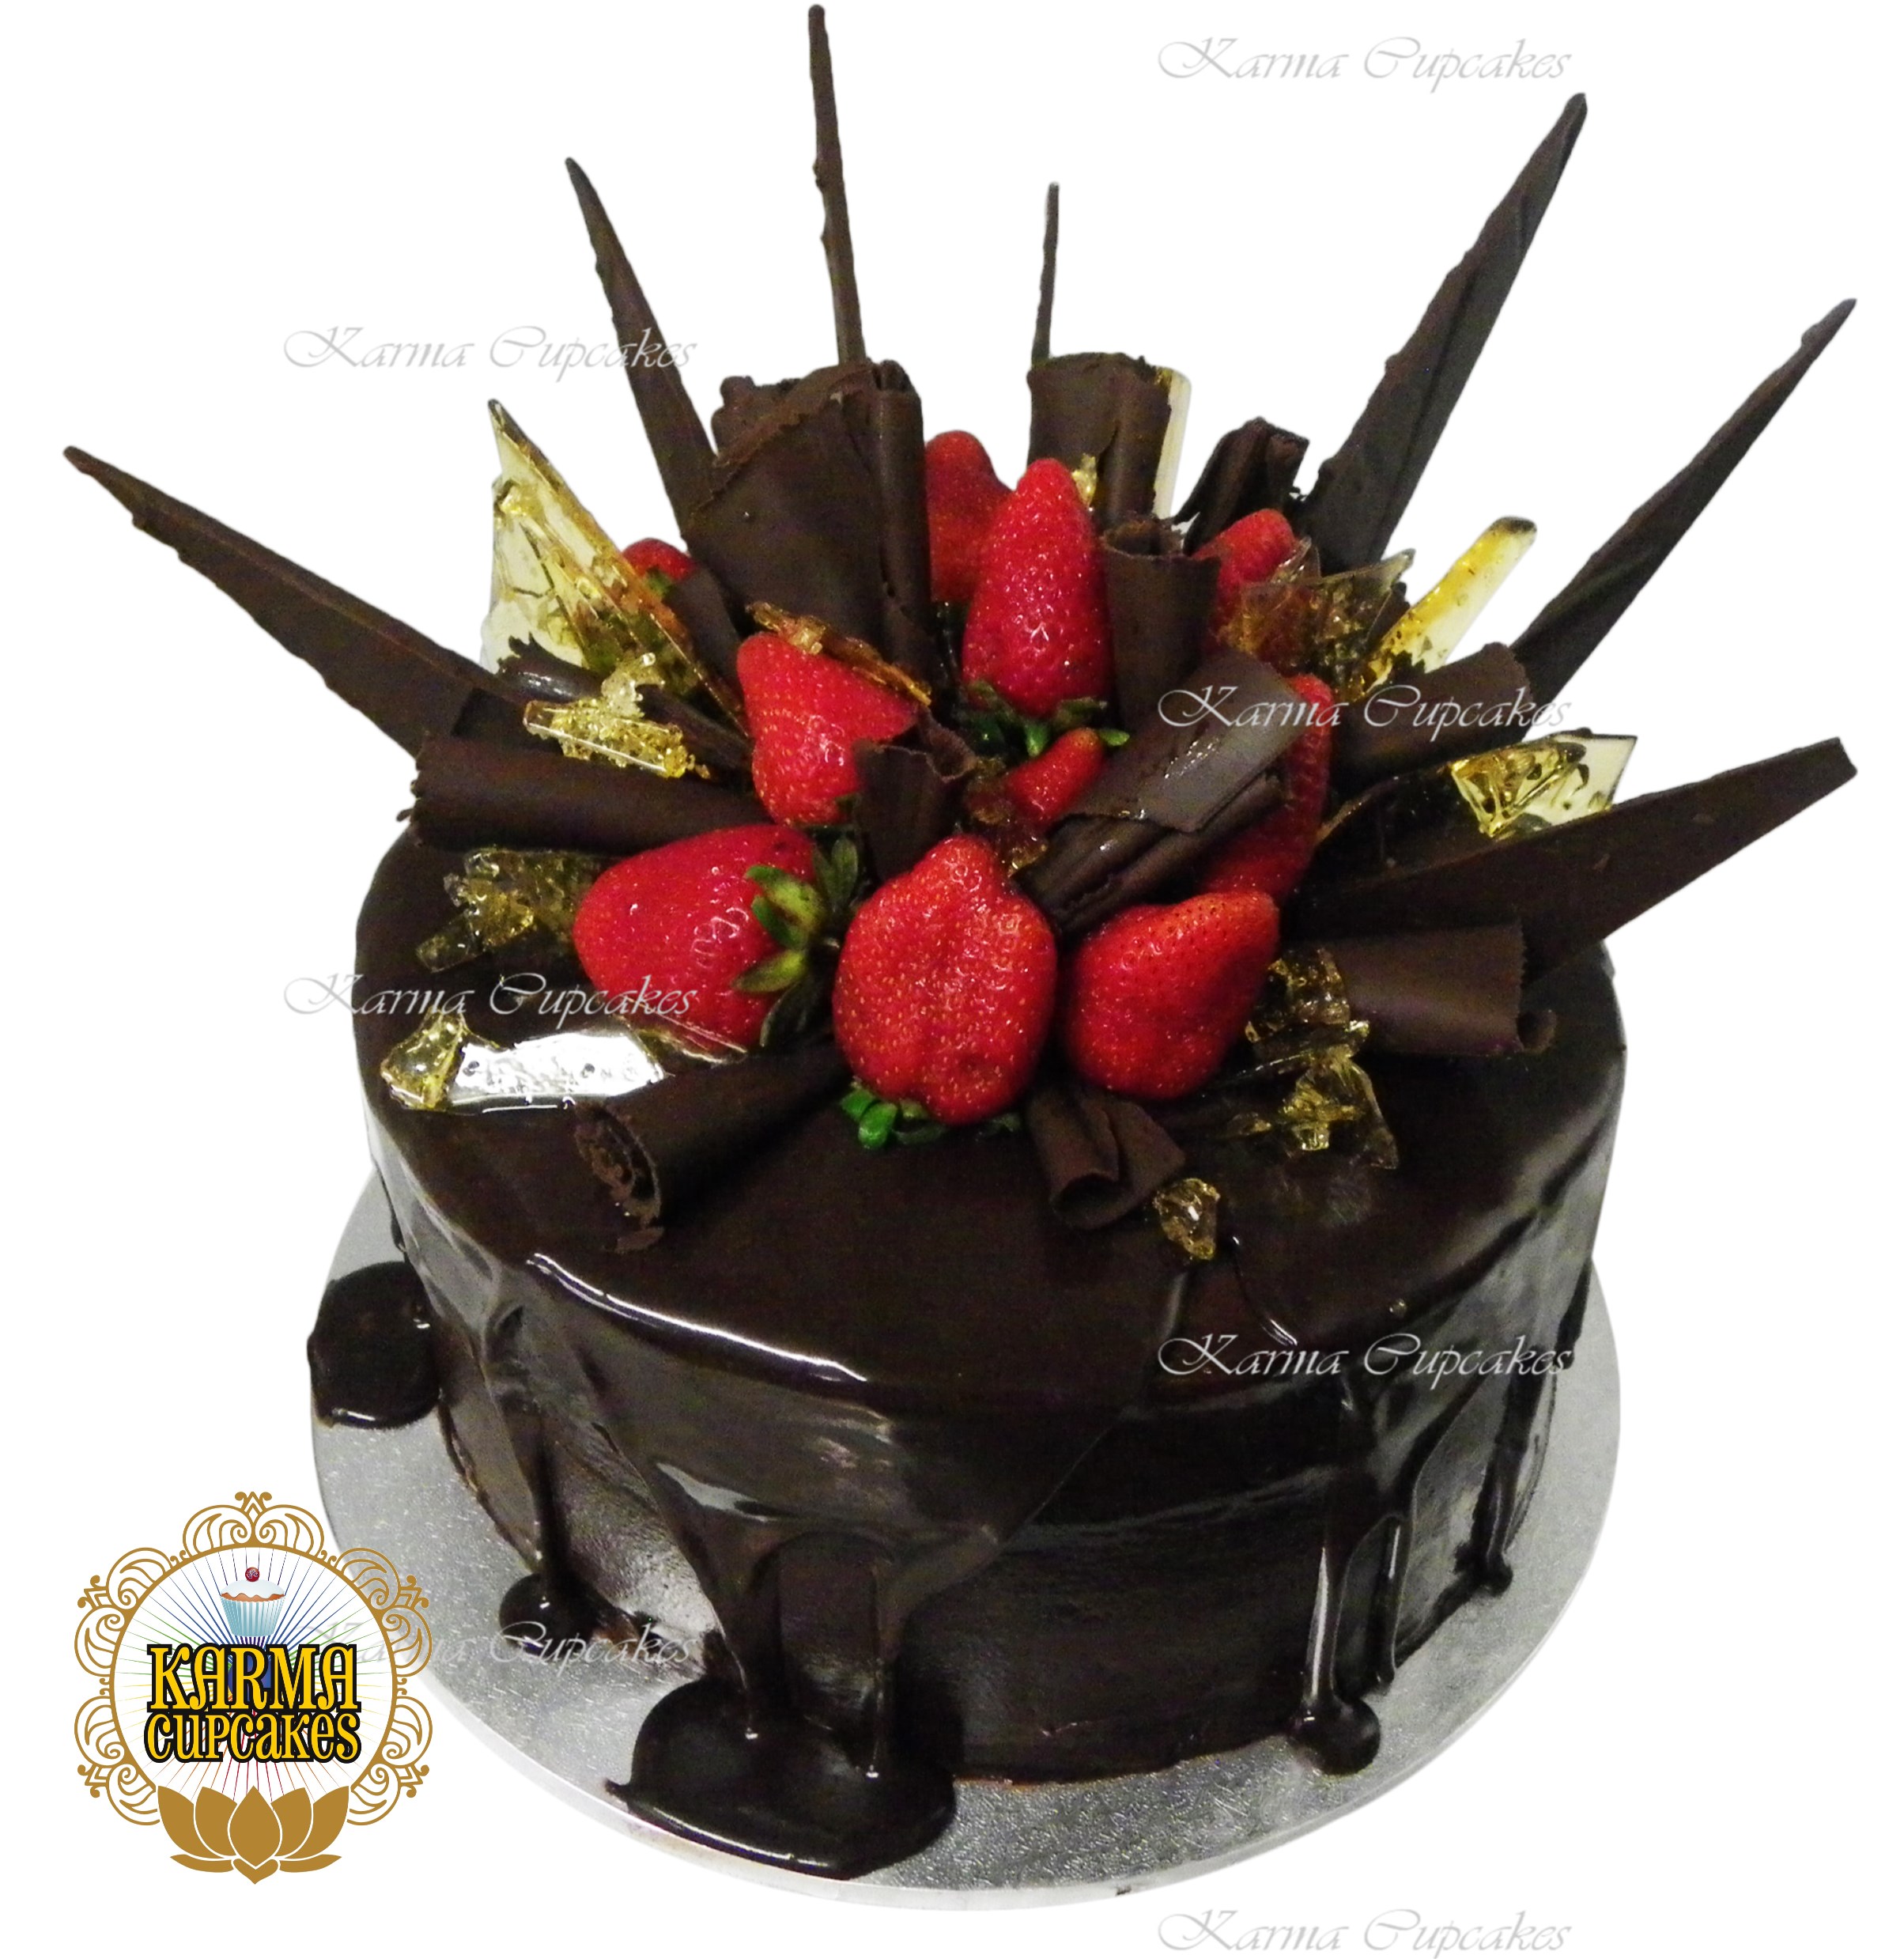 Toffee and Chocolate Shards 8'' Drip cake with Chocolate Dipped Strawberries